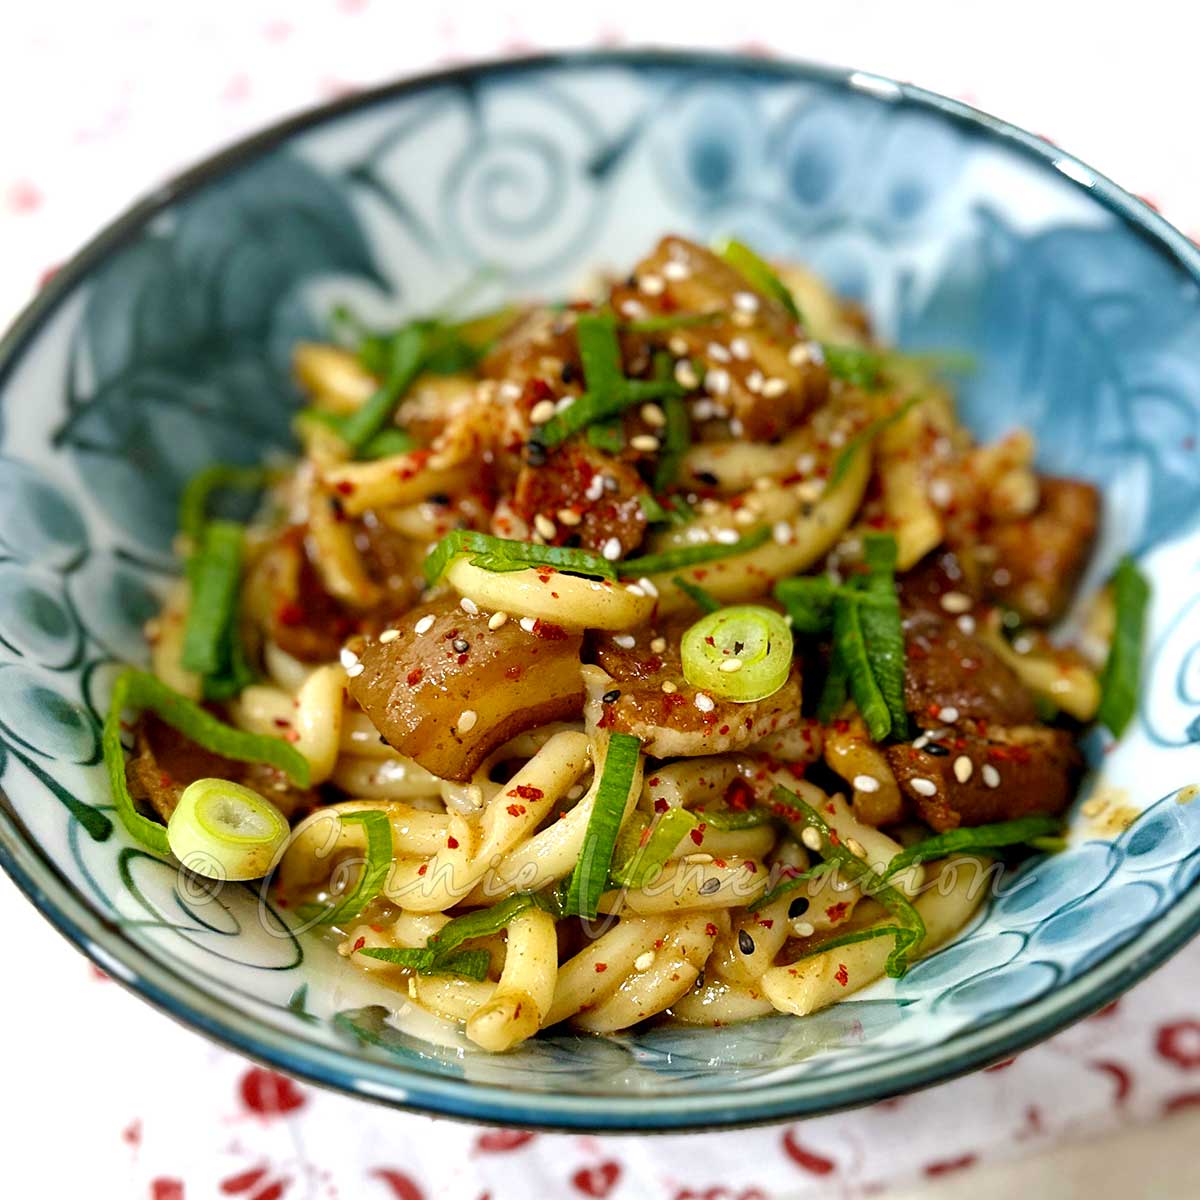 Udon and pork with chili peanut sauce